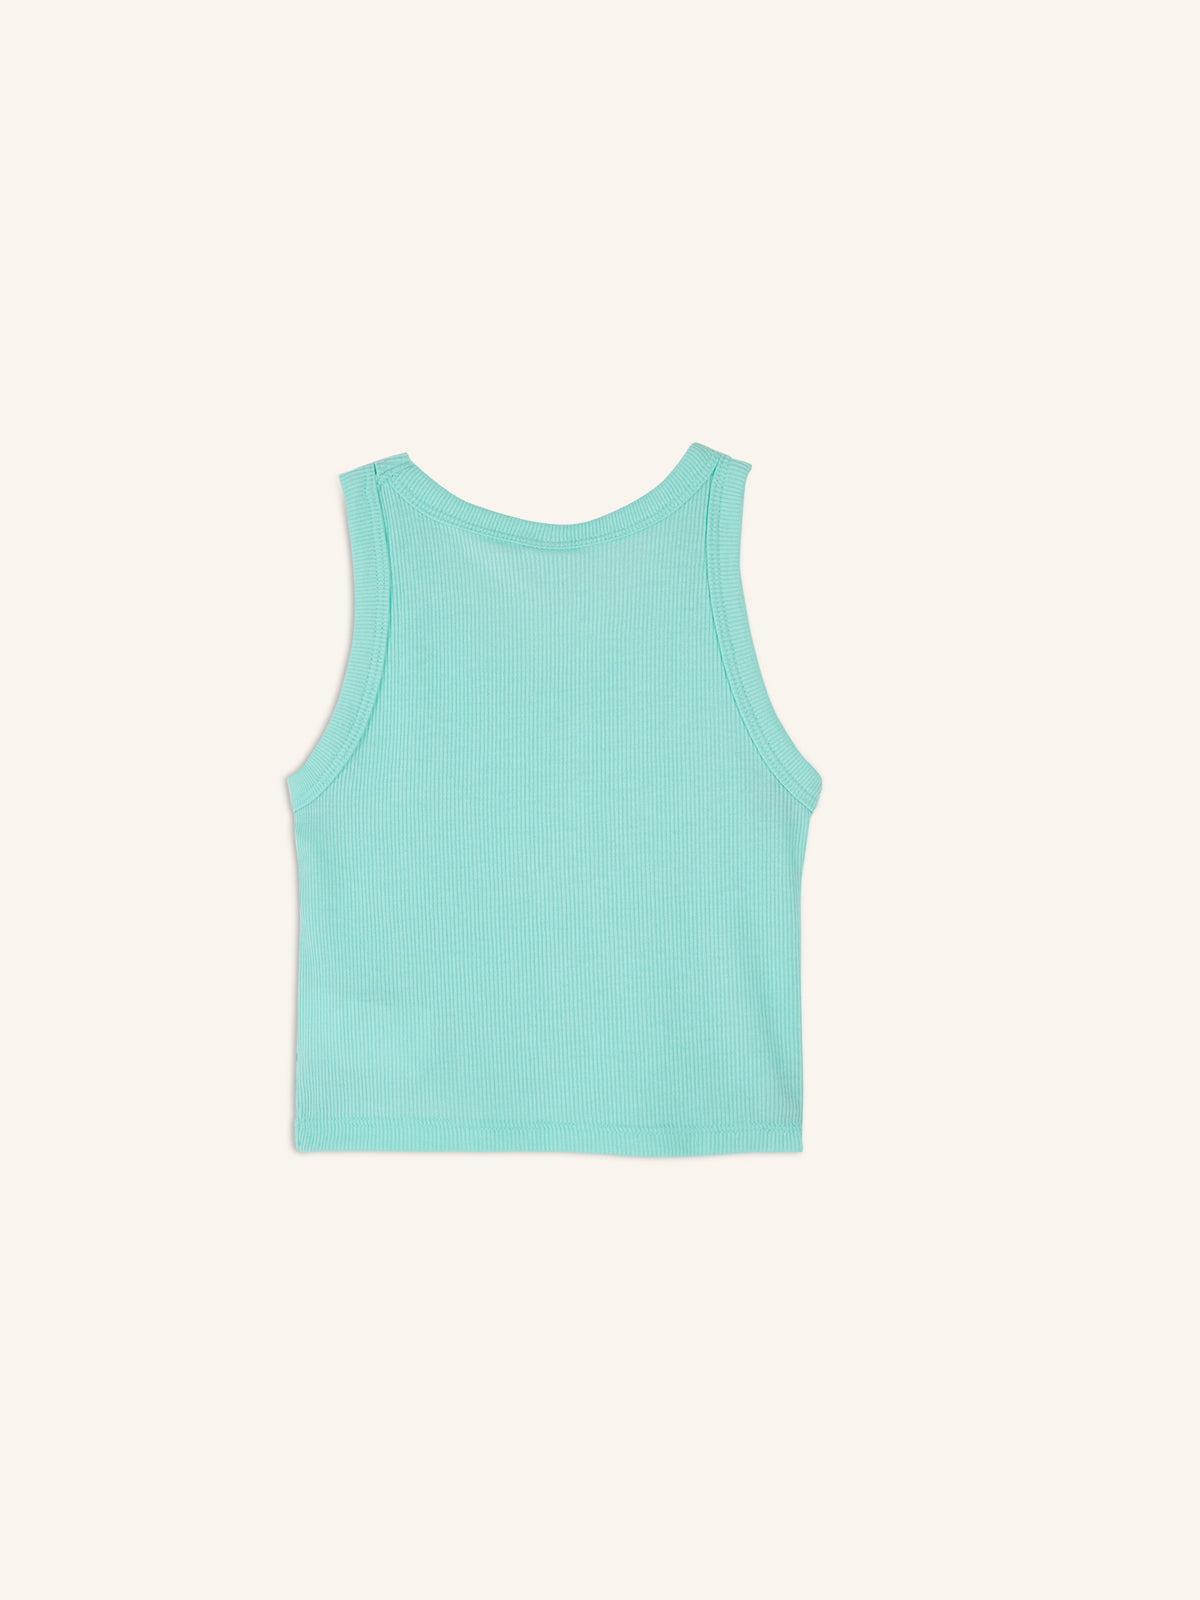 Cropped UltraLite Rib-Knit Performance Tank for Girls - Old Navy Philippines